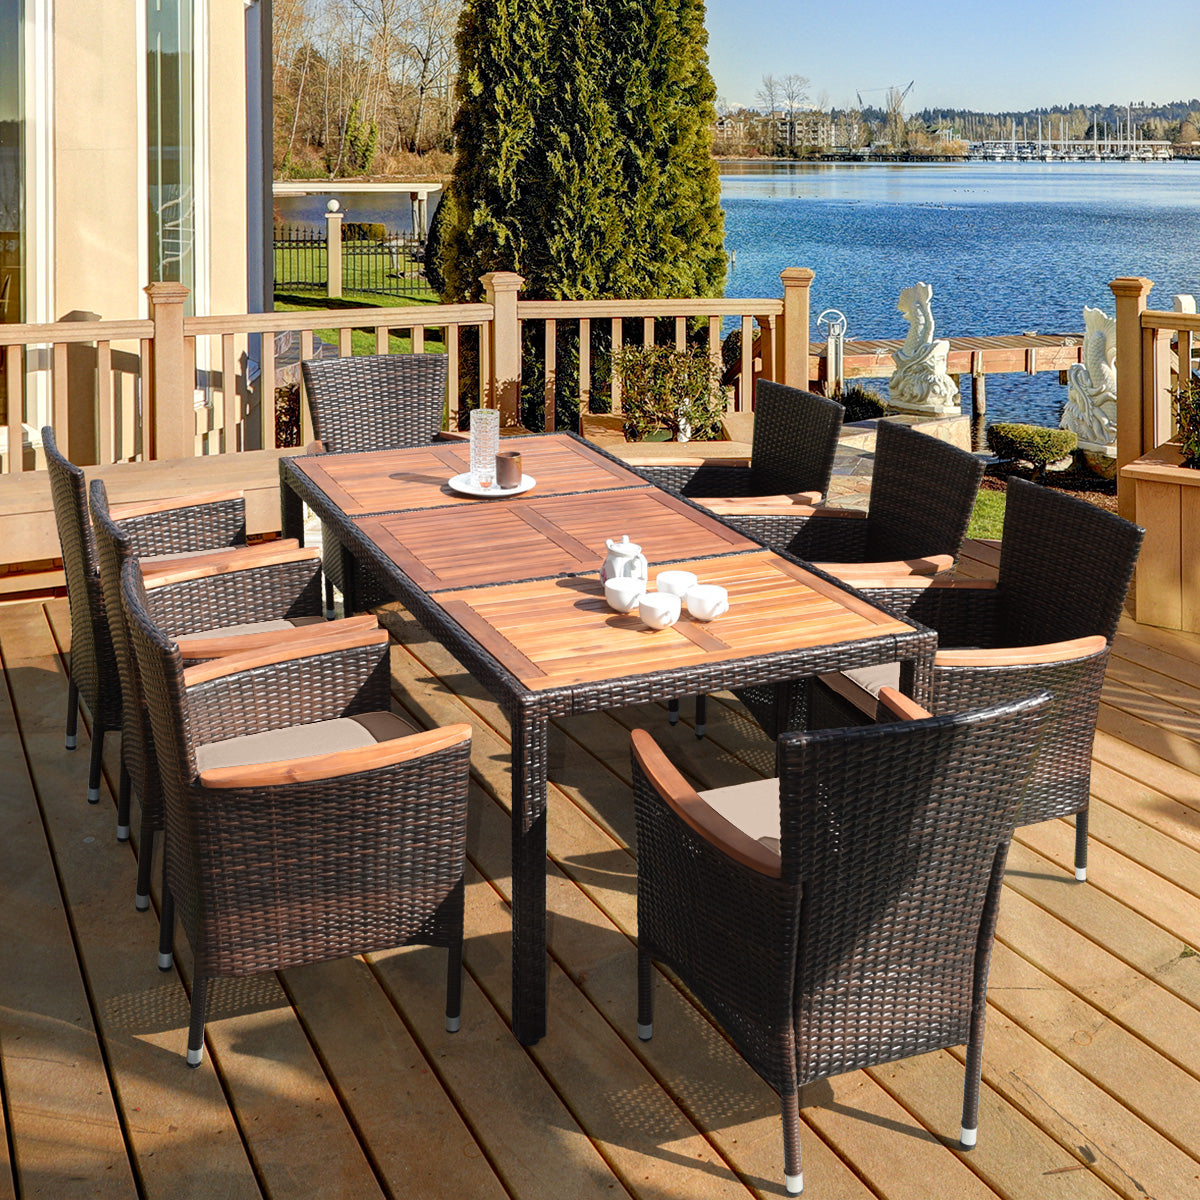 Premium Acacia Wood Table: The table top of this patio dining table consists of three acacia panels, which is a highly durable tropical hardwood that is safer than a glass table top, without the worry of breakage. Moreover, with adjustable anti-slip foot pads, this table works well on uneven ground.